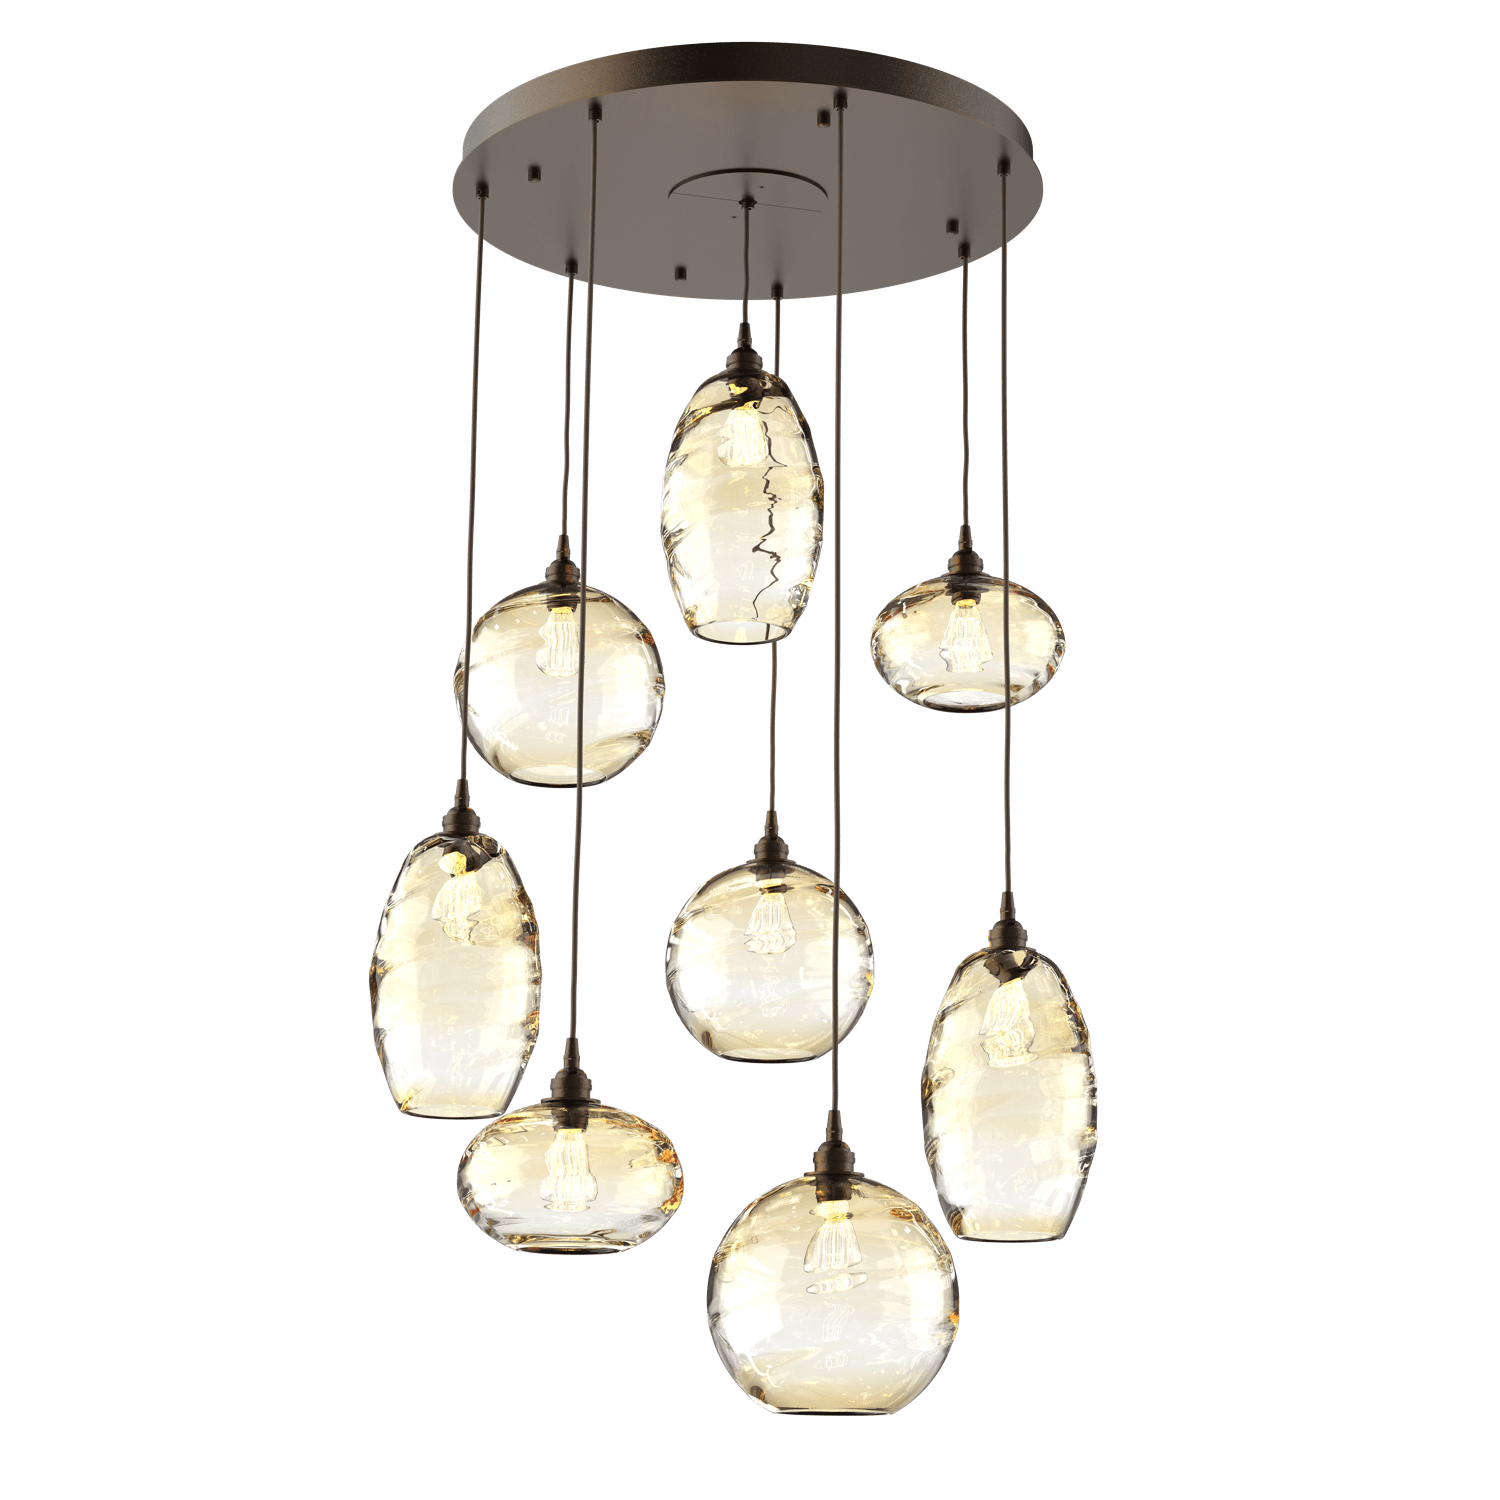 CHB0048-08-FB-OA-Hammerton-Studio-Optic-Blown-Glass-Misto-8-light-round-pendant-chandelier-with-flat-bronze-finish-and-optic-amber-blown-glass-shades-and-incandescent-lamping